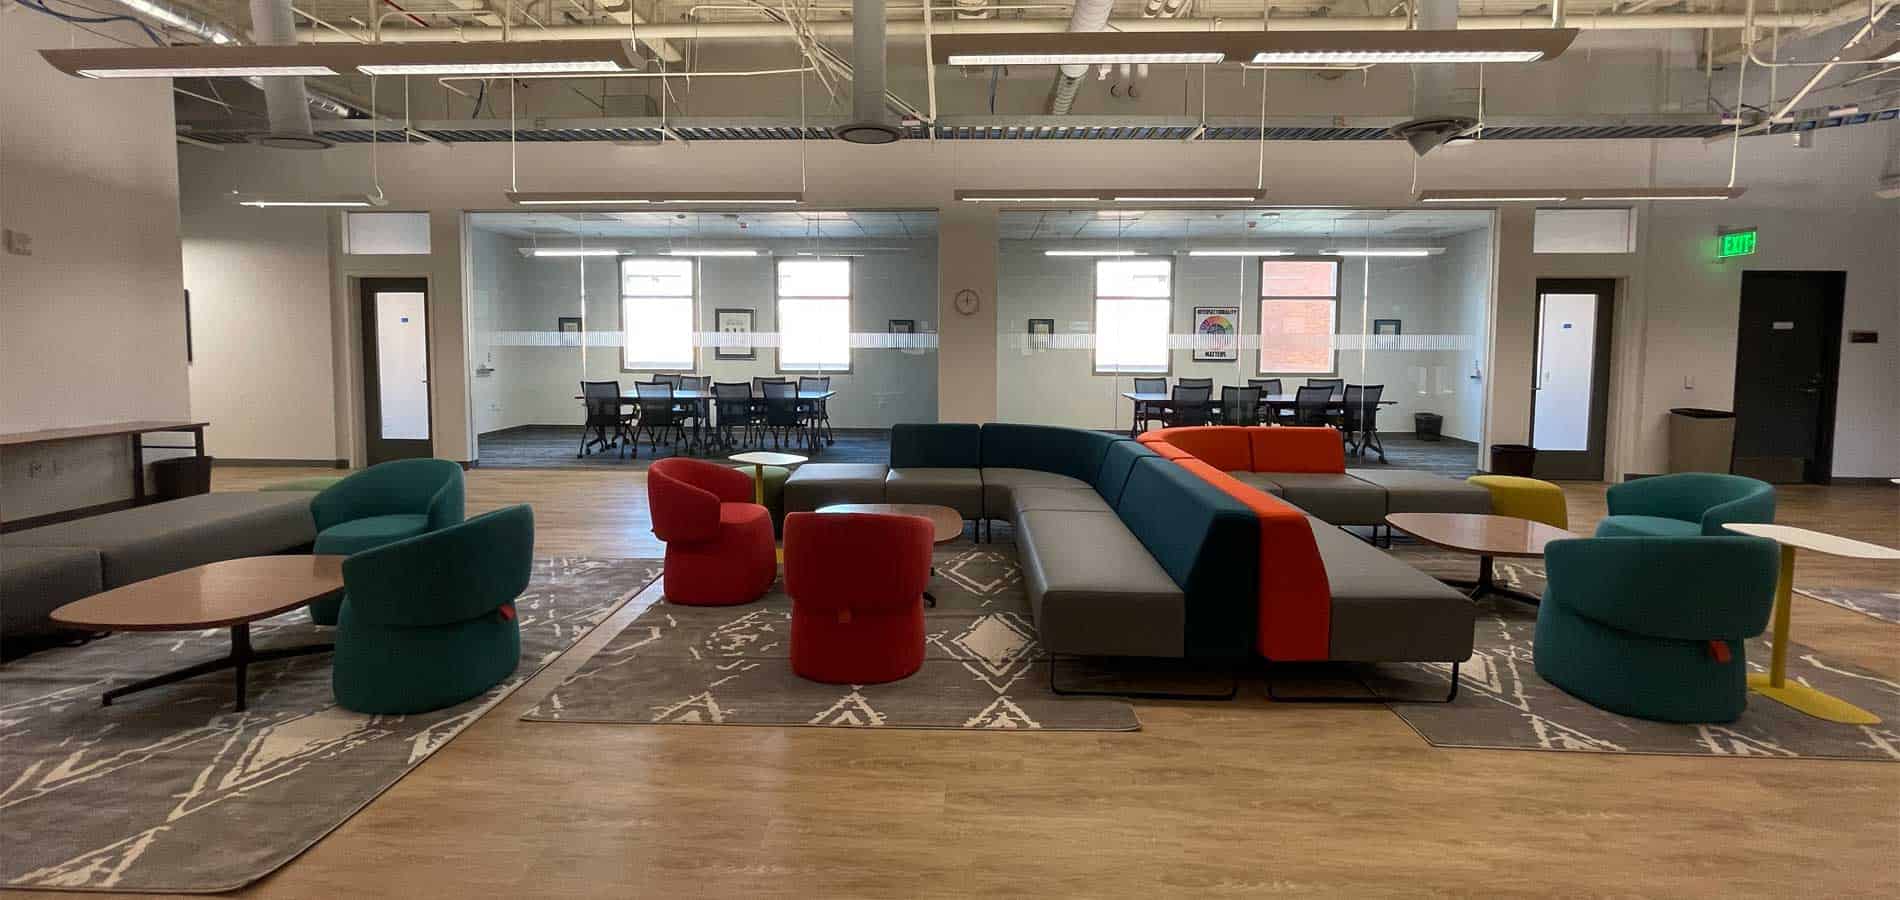 USC Student Organization Indivualized Workspace with Riverbend Sofa